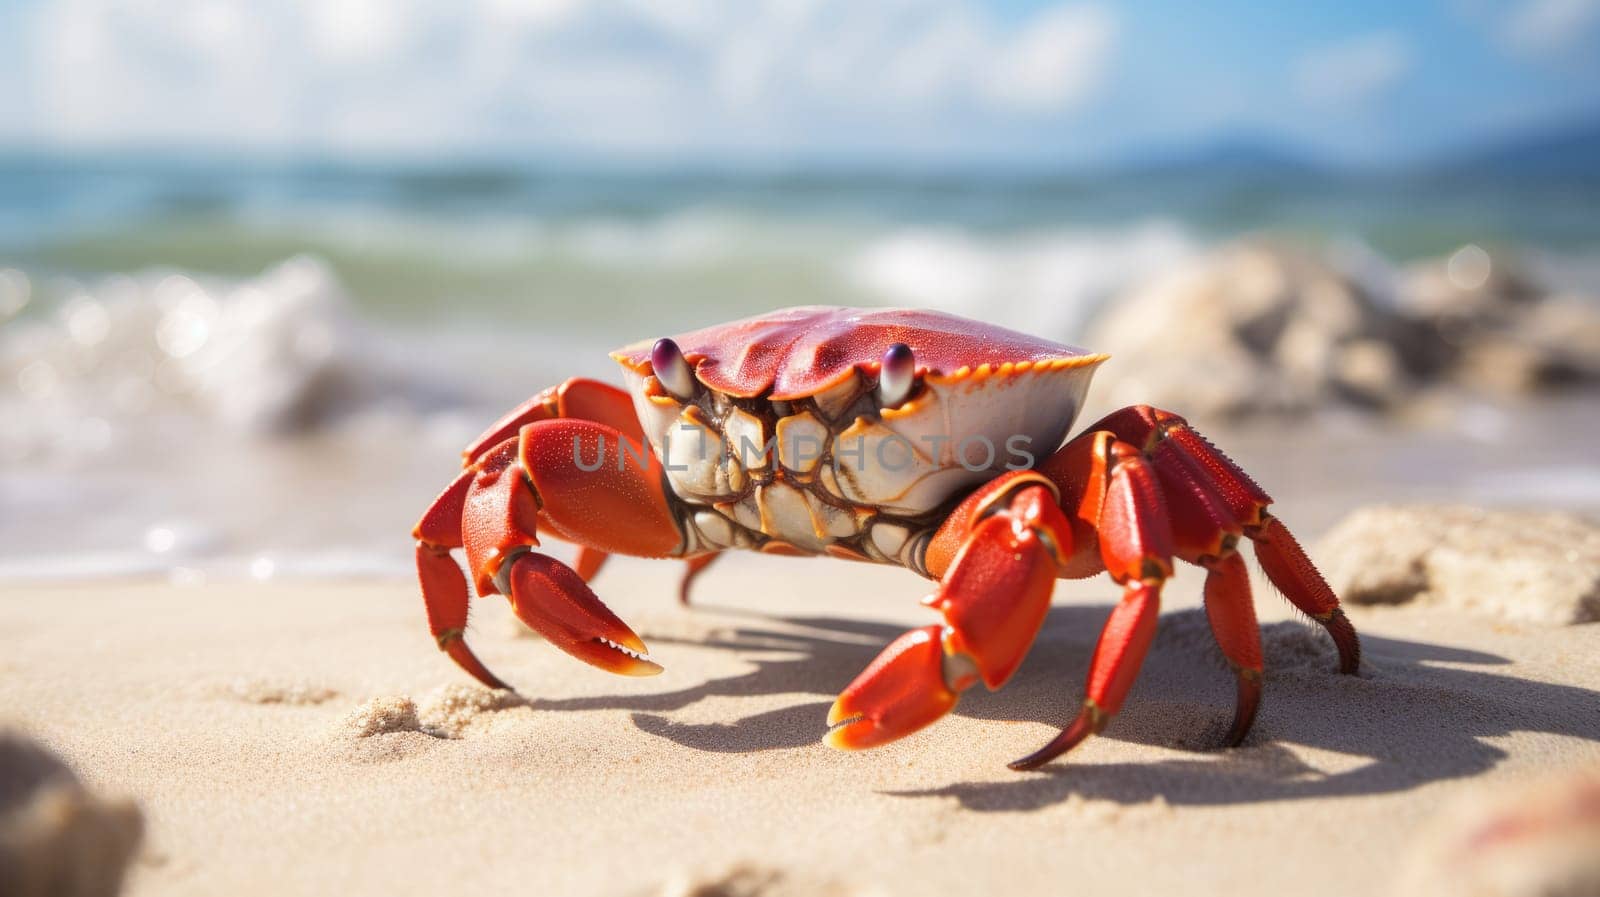 Magnificent crab on the beach, blurred sea background by natali_brill